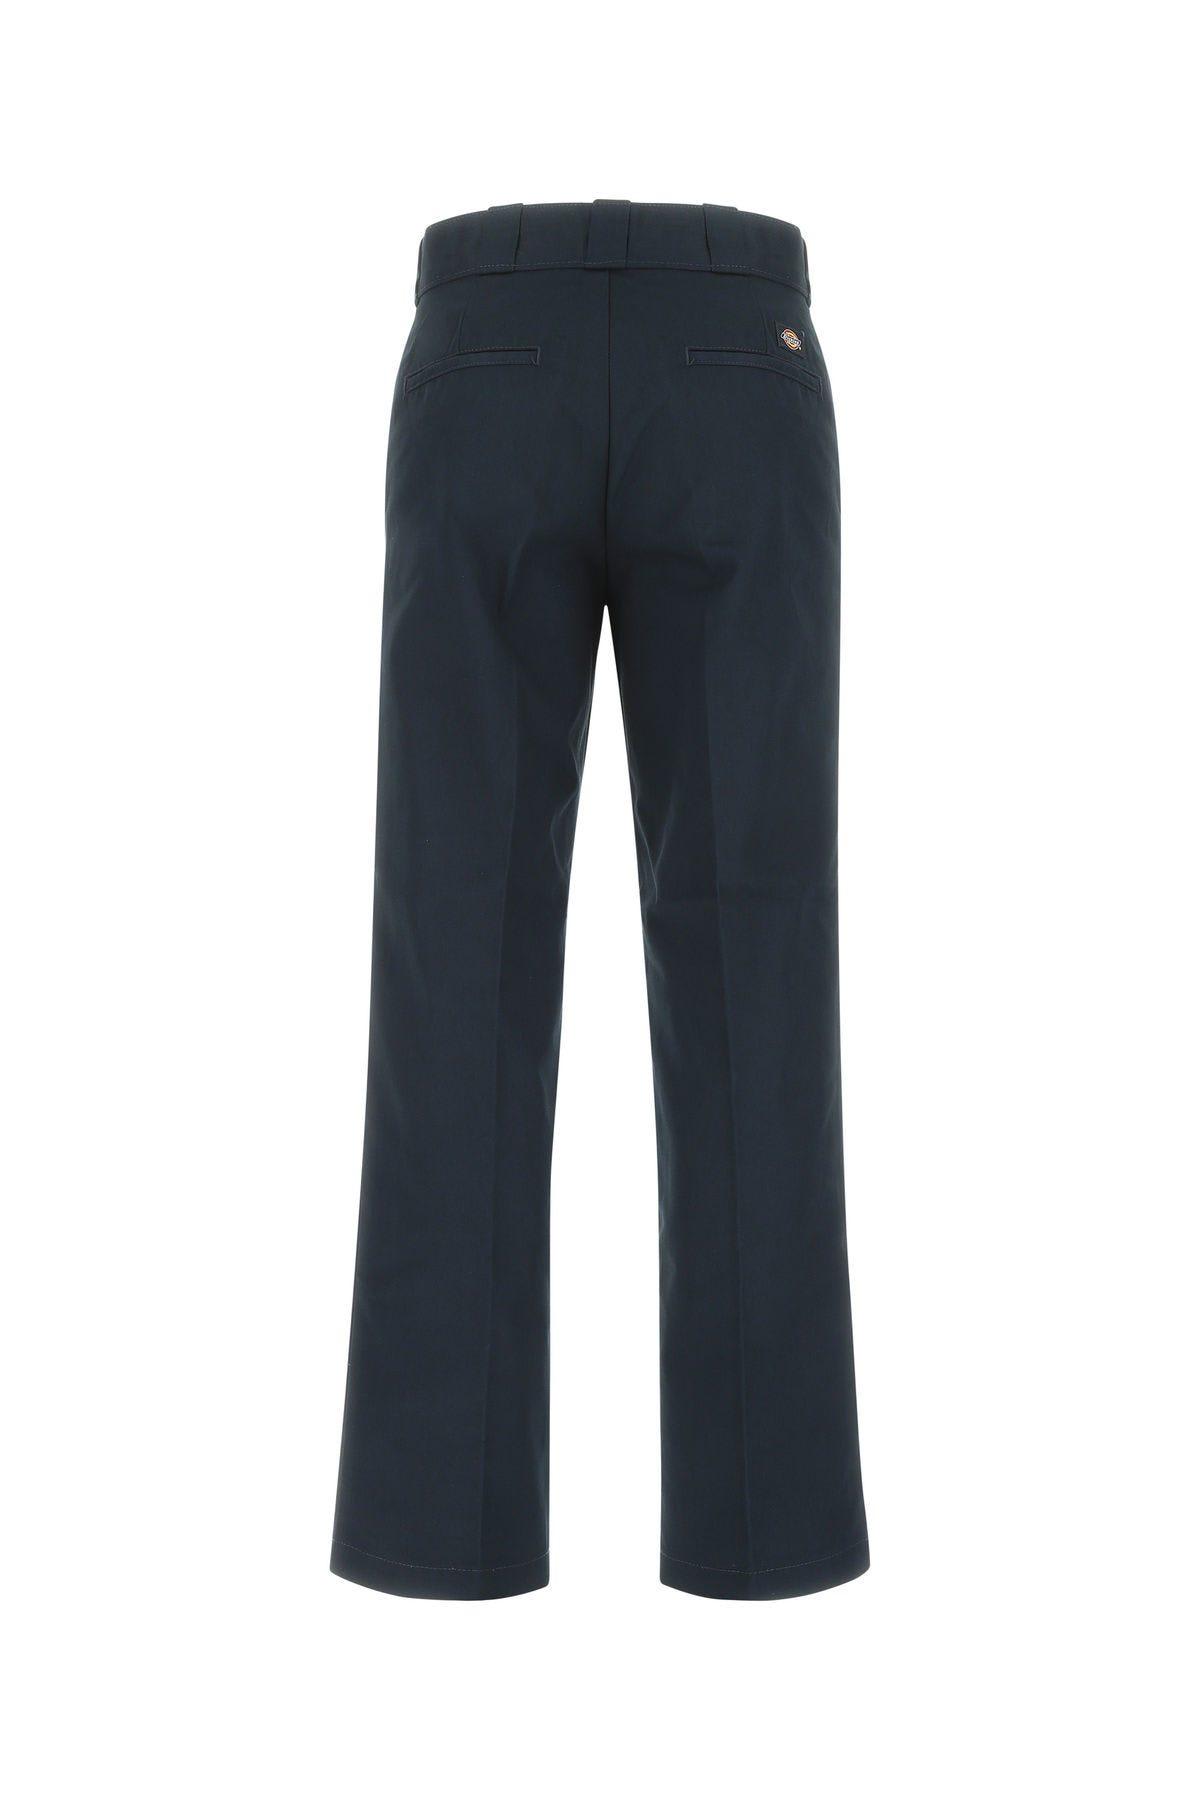 Shop Dickies Midnight Blue Polyester Blend Pant